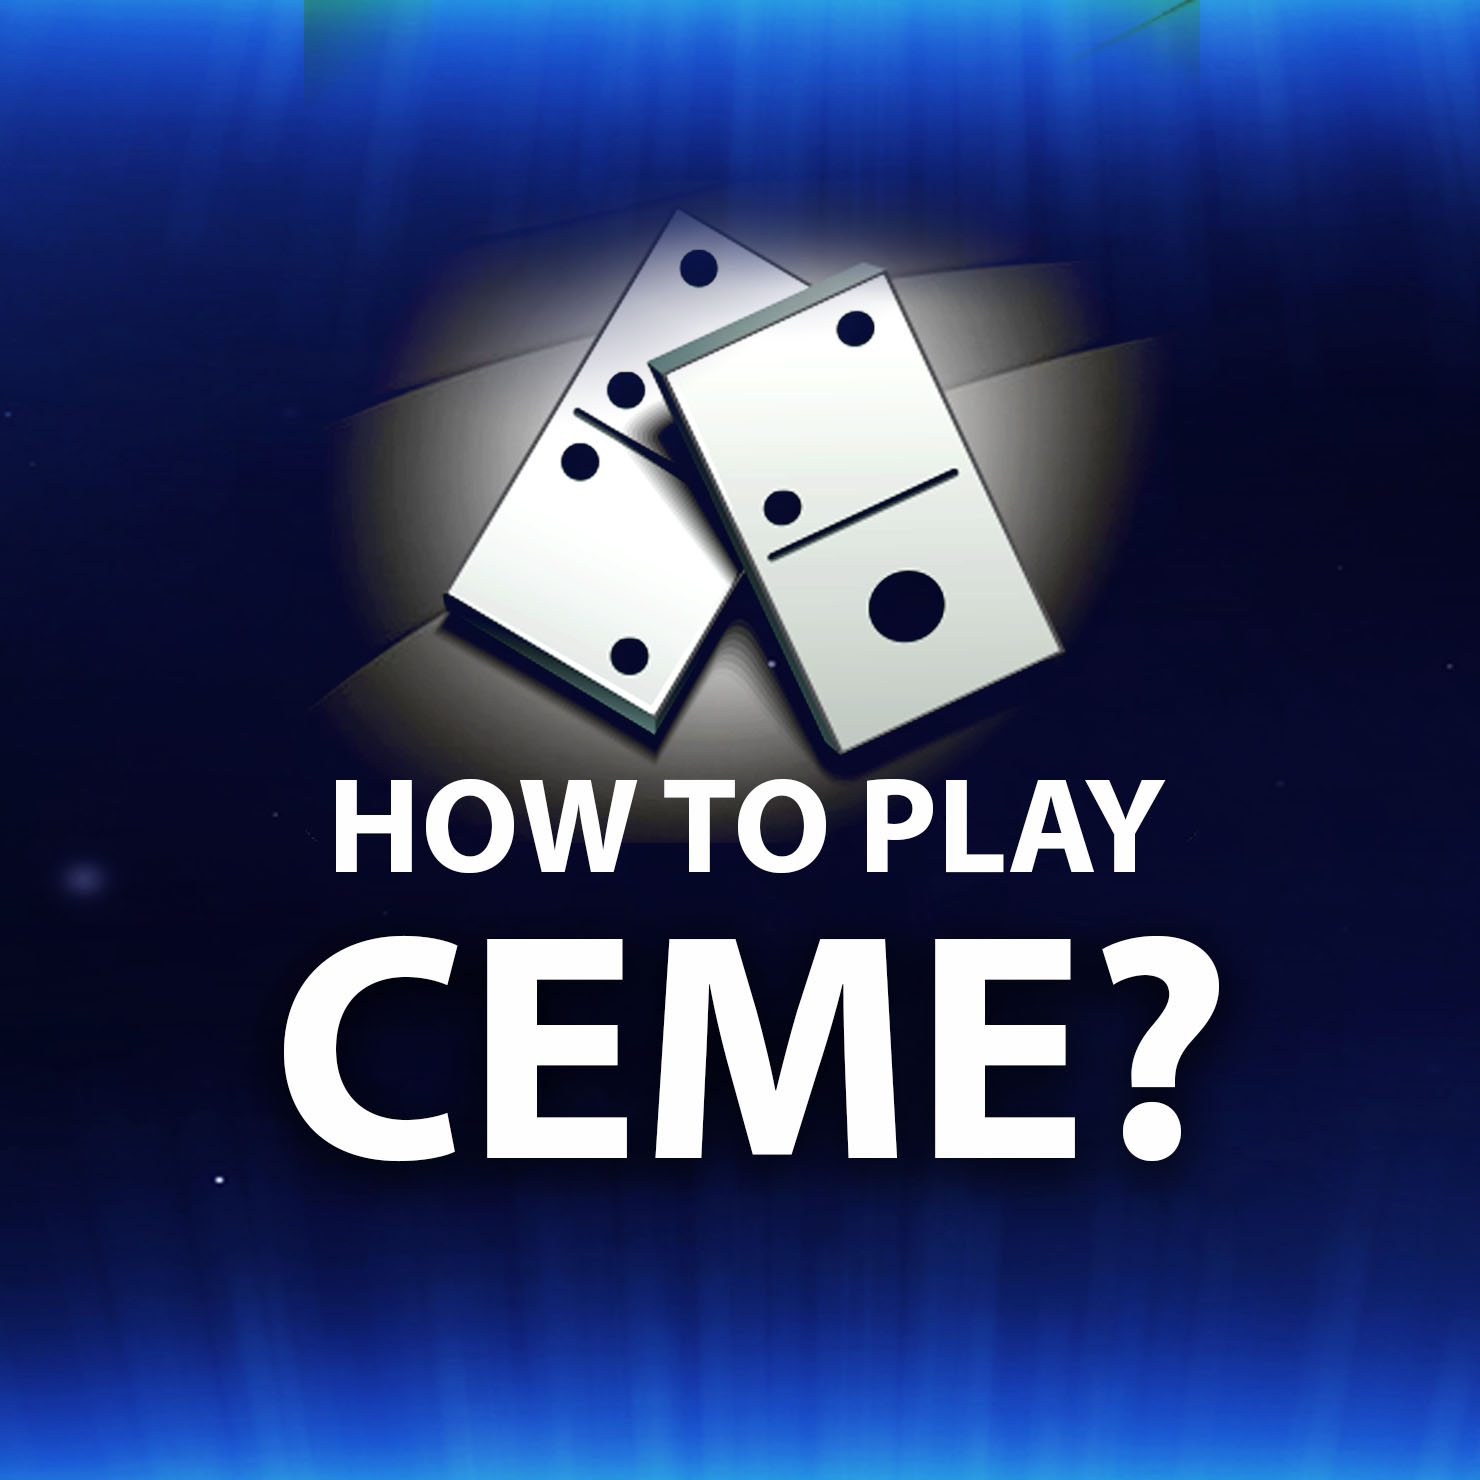 How To Play Ceme